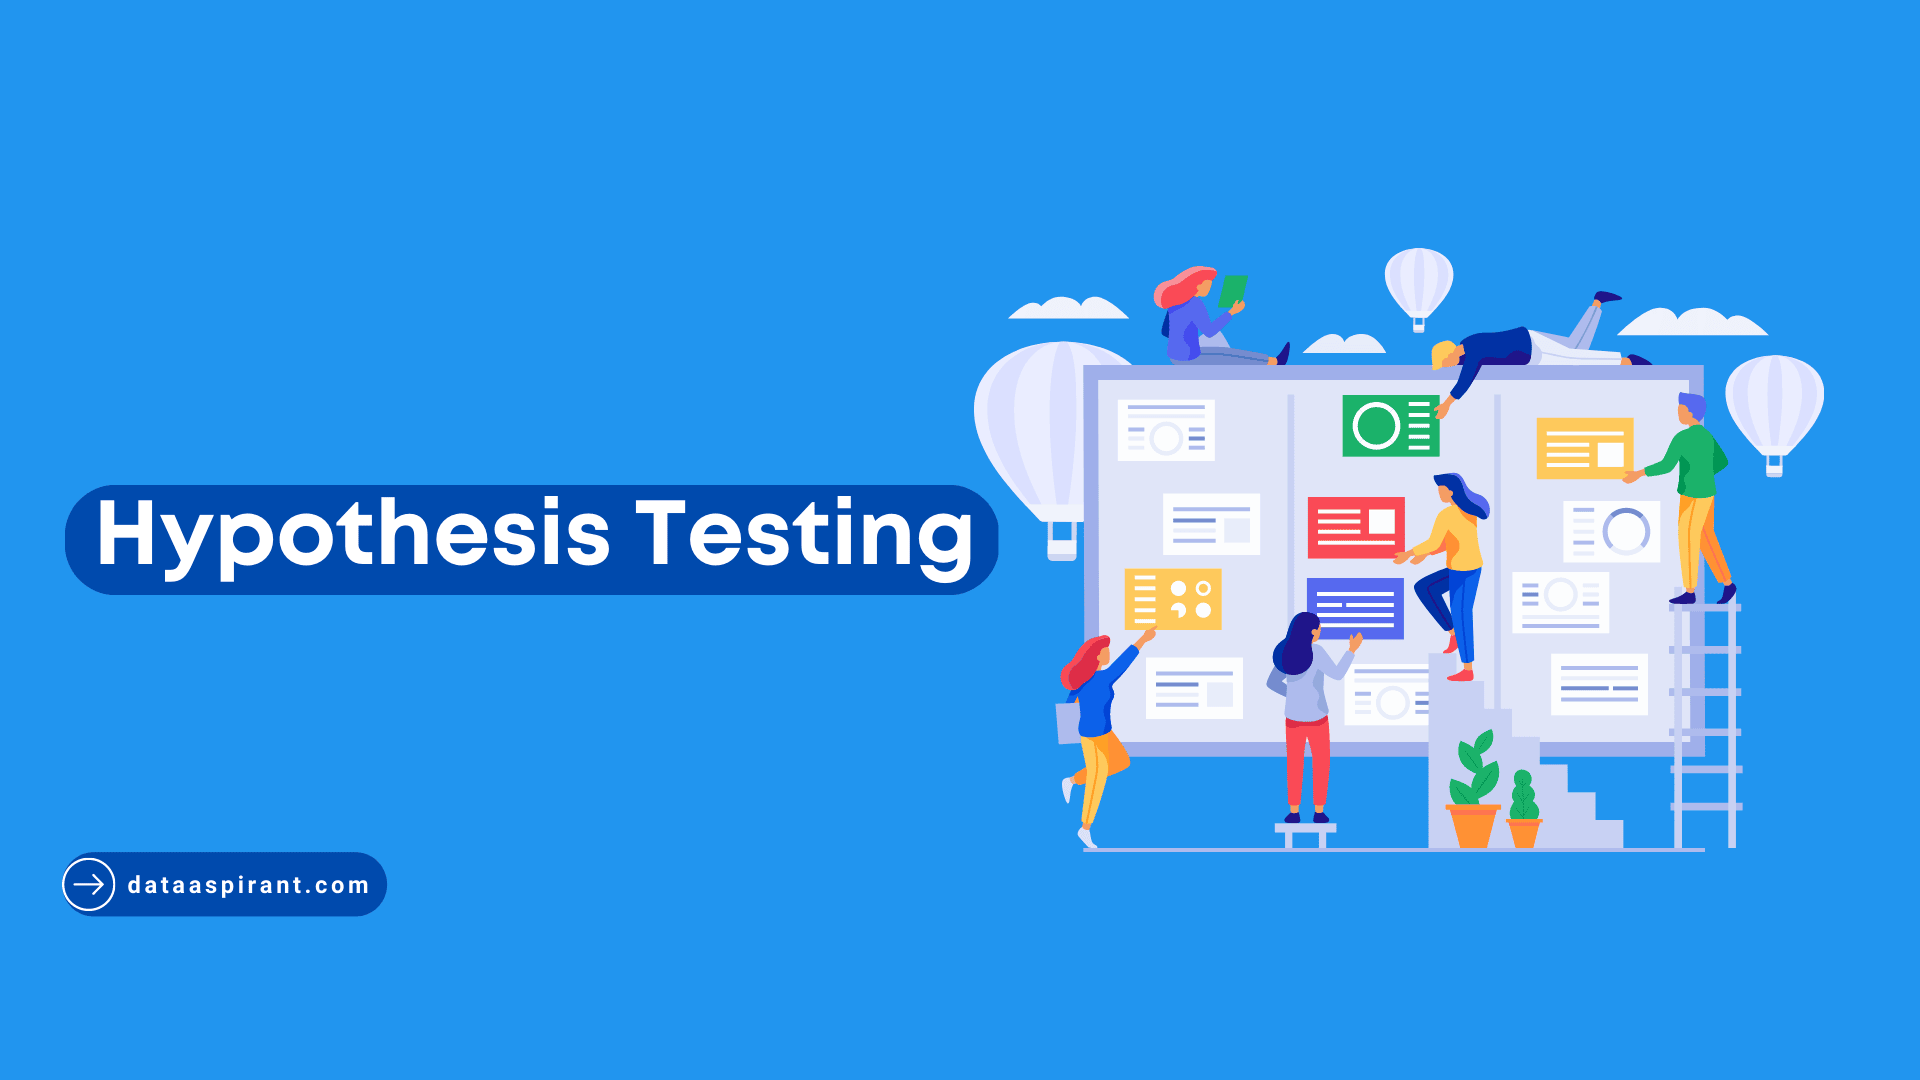 What is Hypothesis Testing